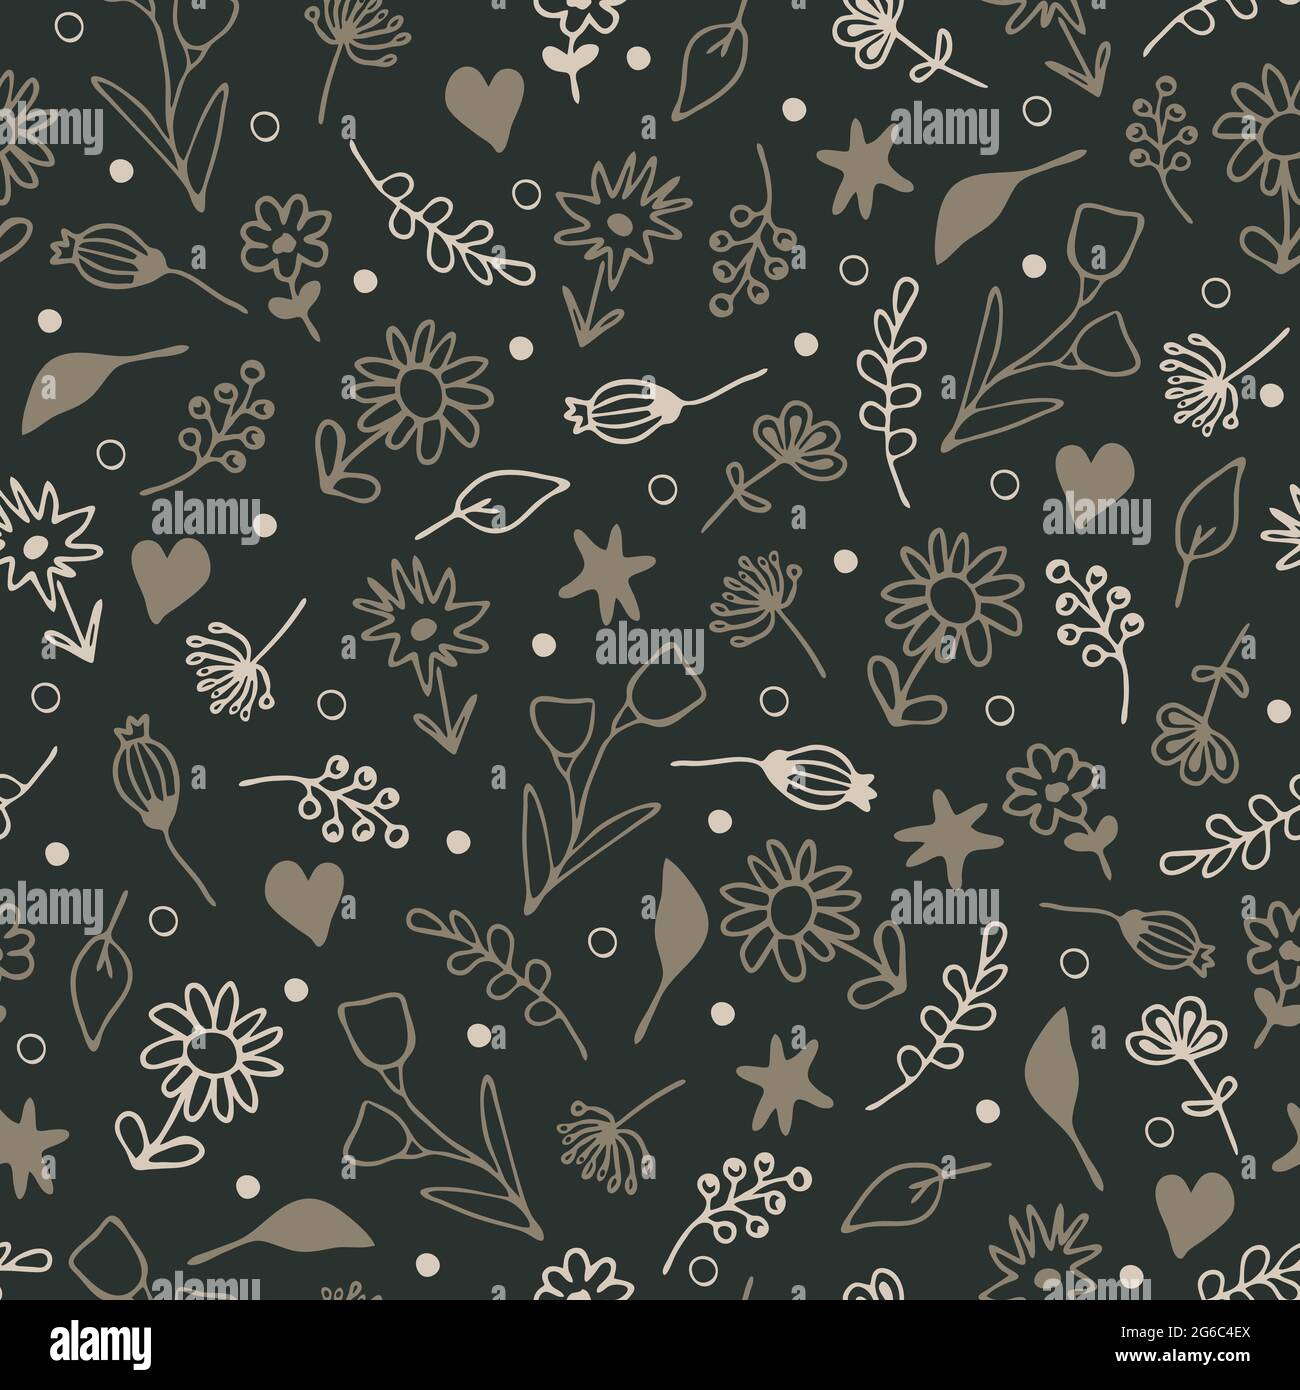 Seamless Vector Pattern With Small Grey Flowers On Dark Green